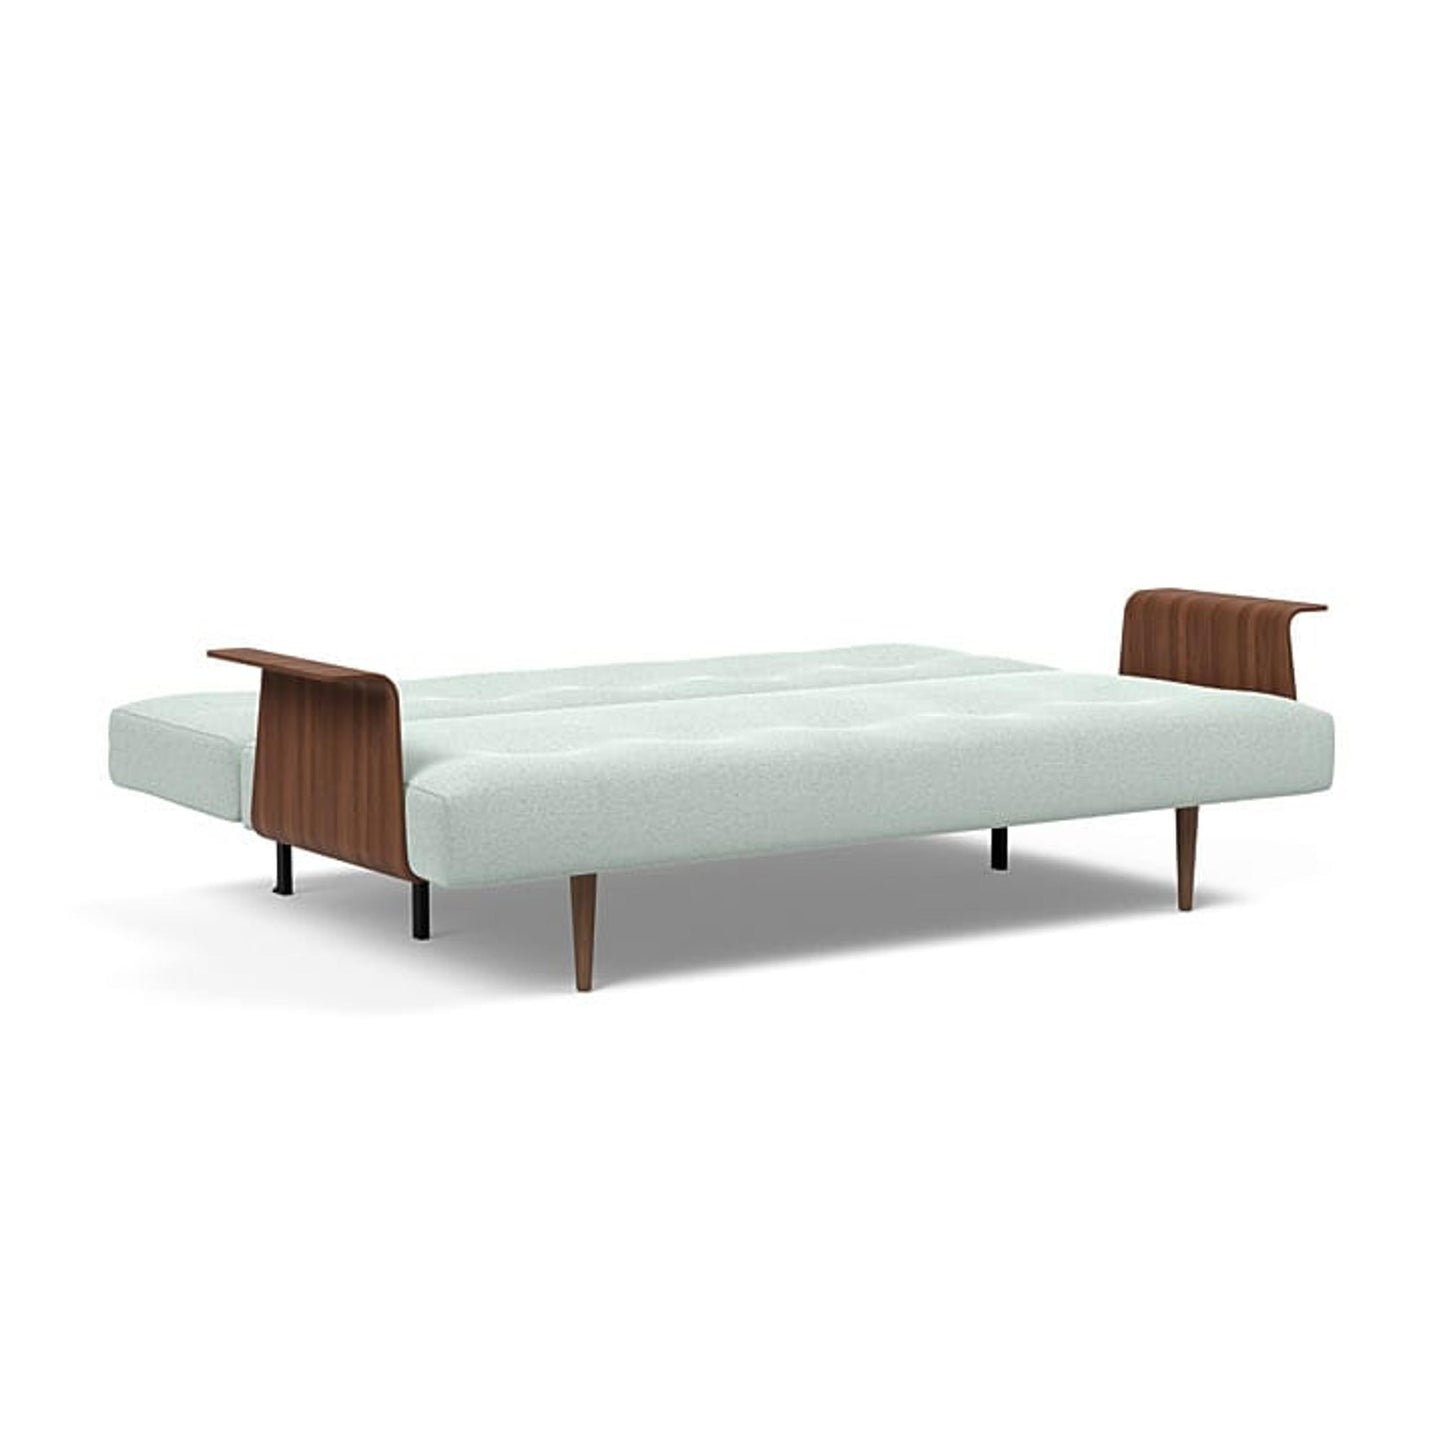 Recast Plus Sofa Bed w/Walnut Arms in Soft Pacific Pearl